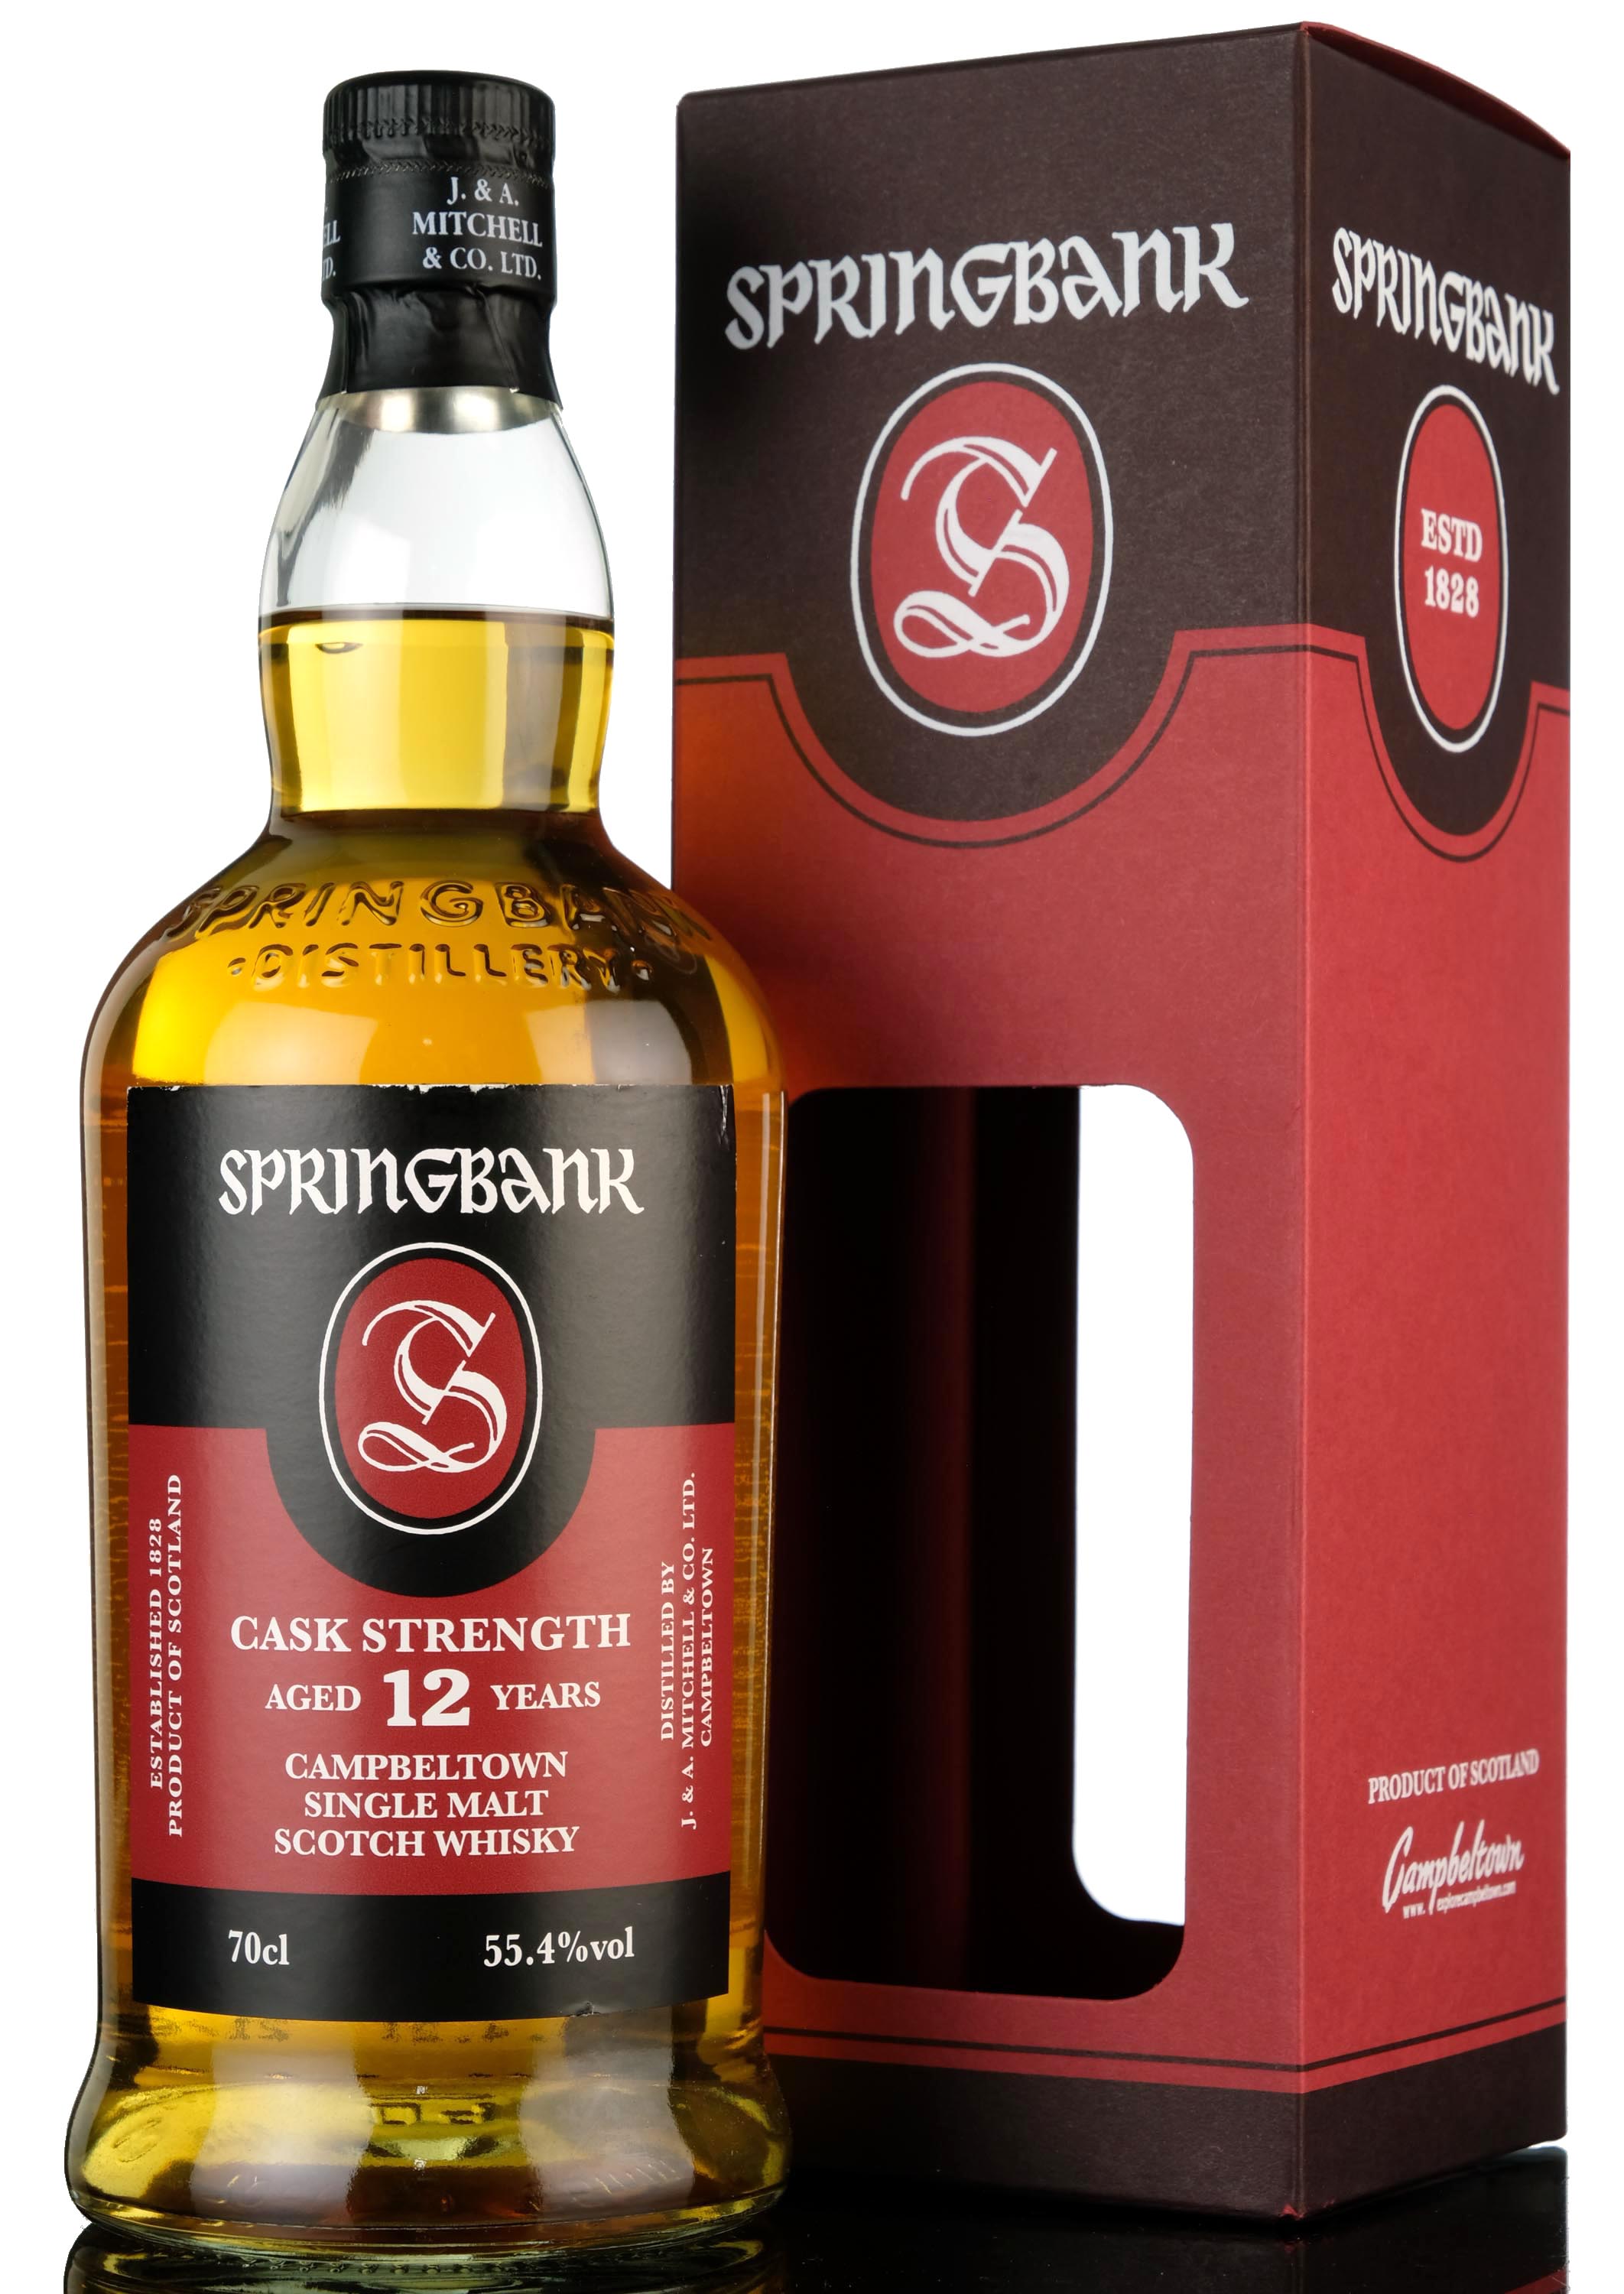 Springbank 12 Year Old - Cask Strength 55.4% - 2021 Release